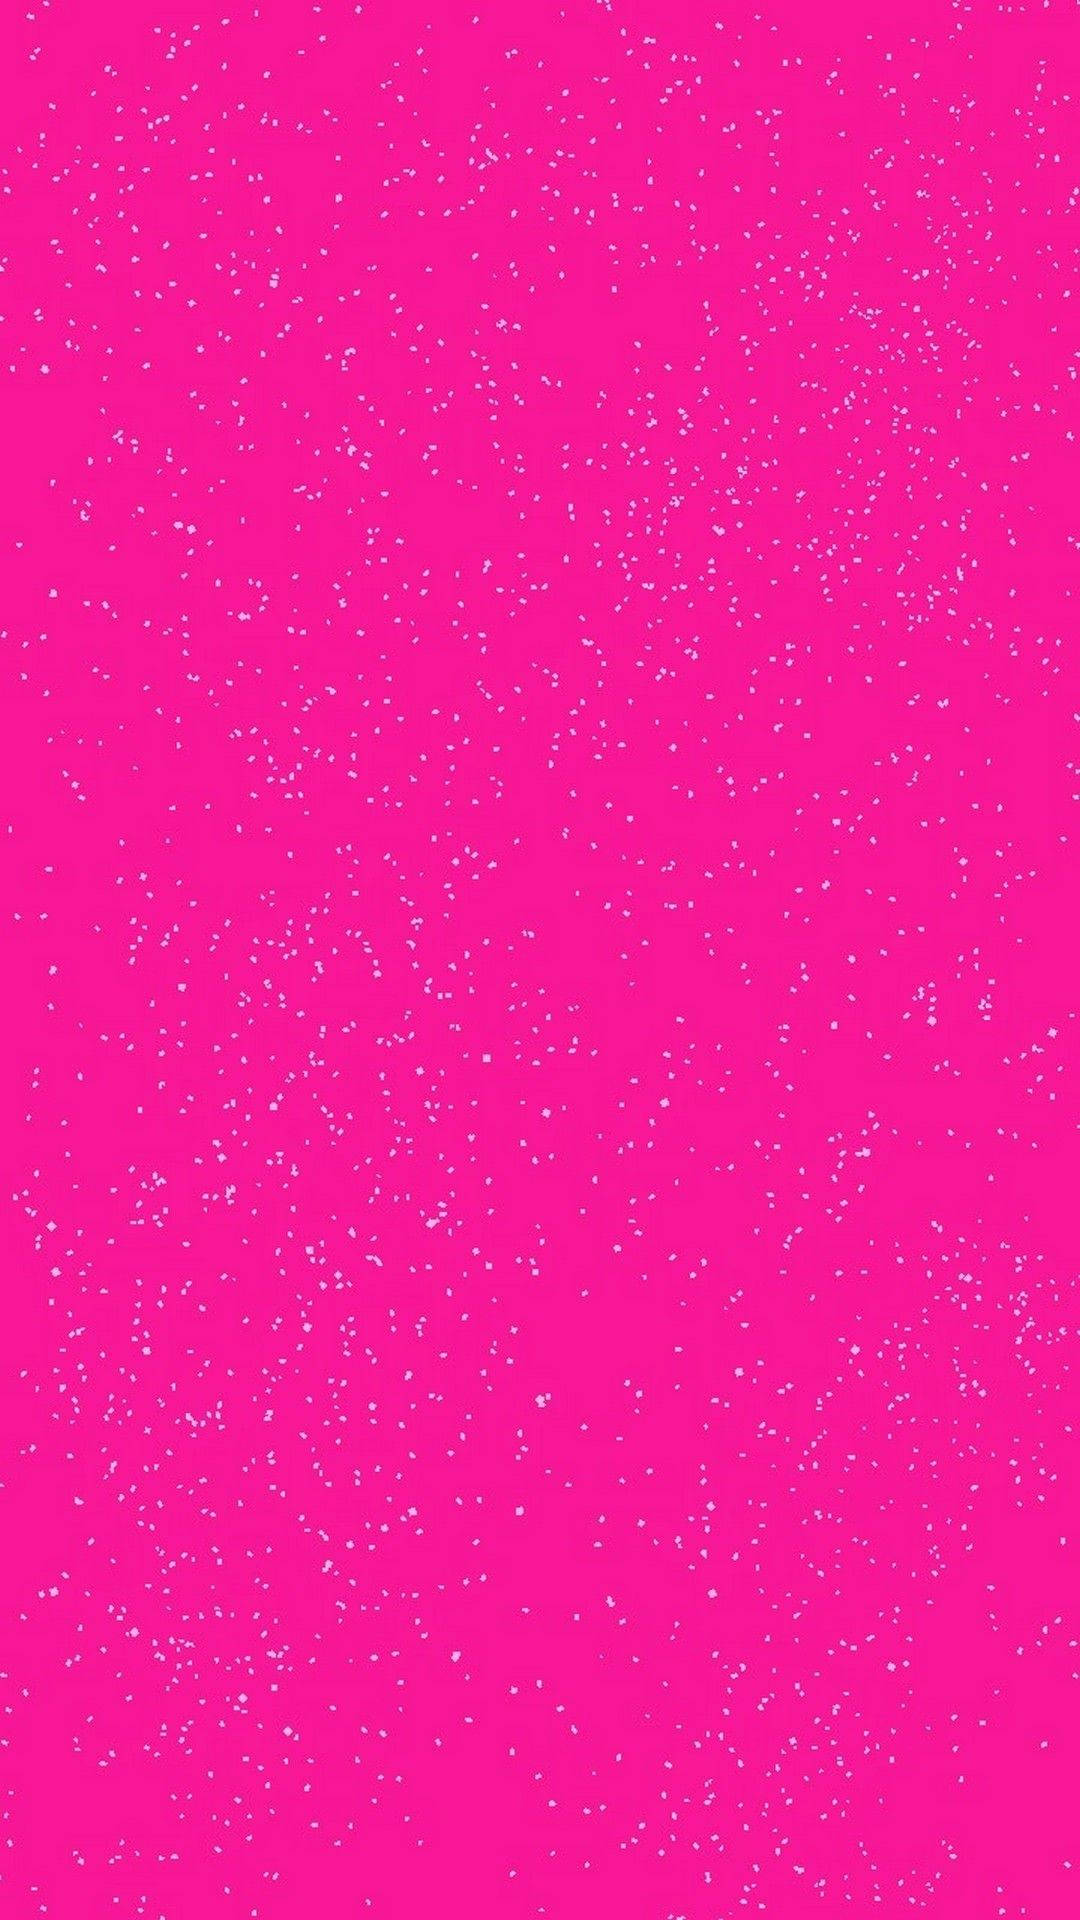 Pink Glitter With White Dots Background